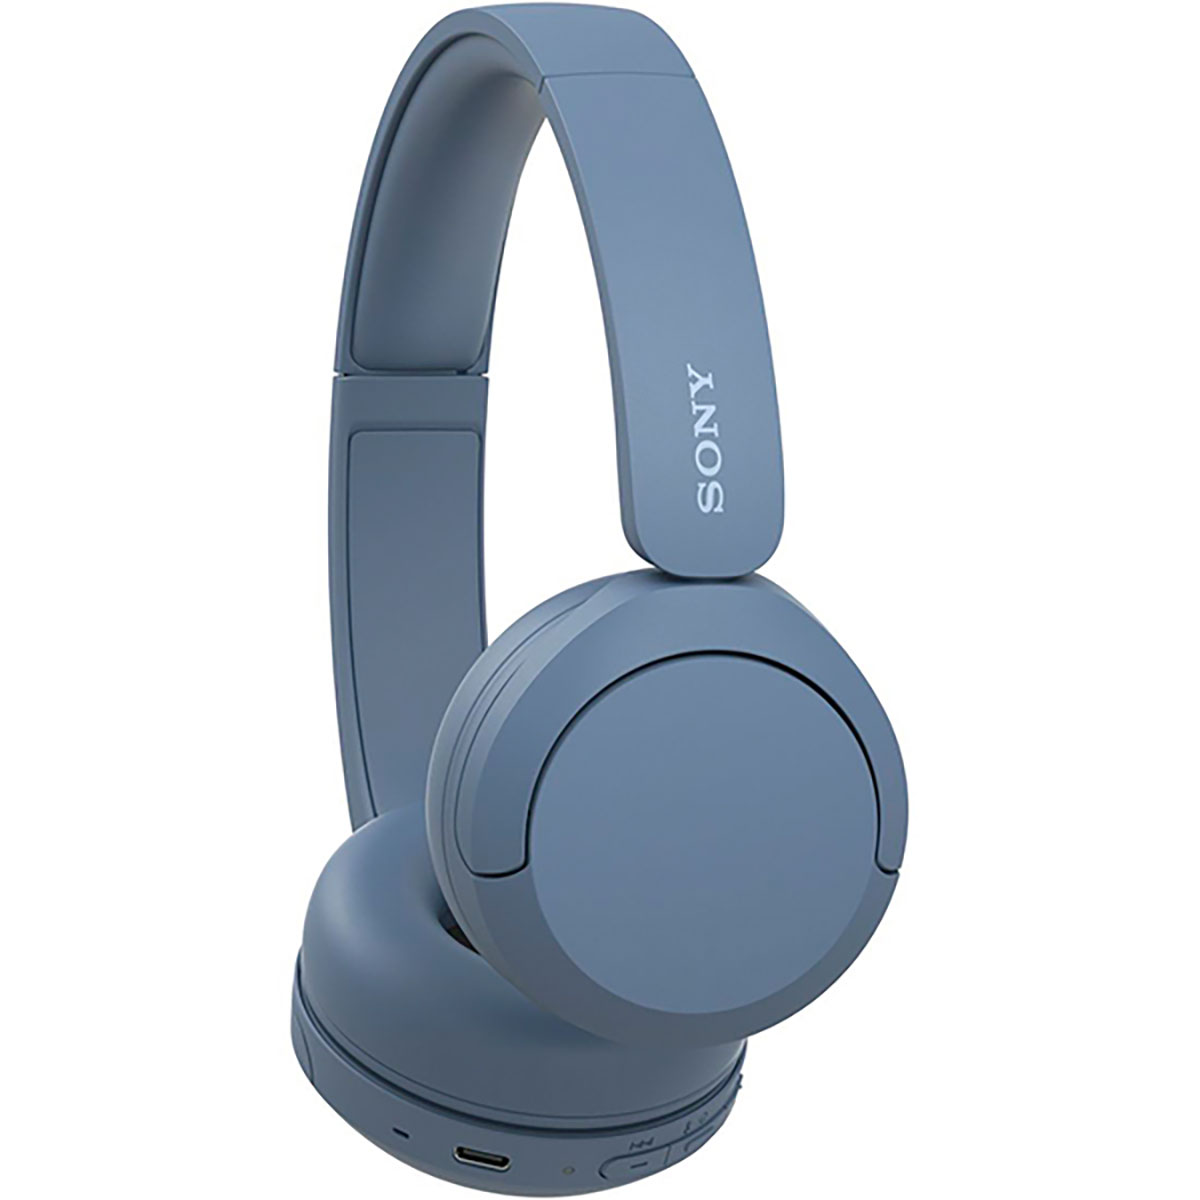 Sony - Wireless Headphones Bluetooth On-Ear Headset with Microphone, Blue